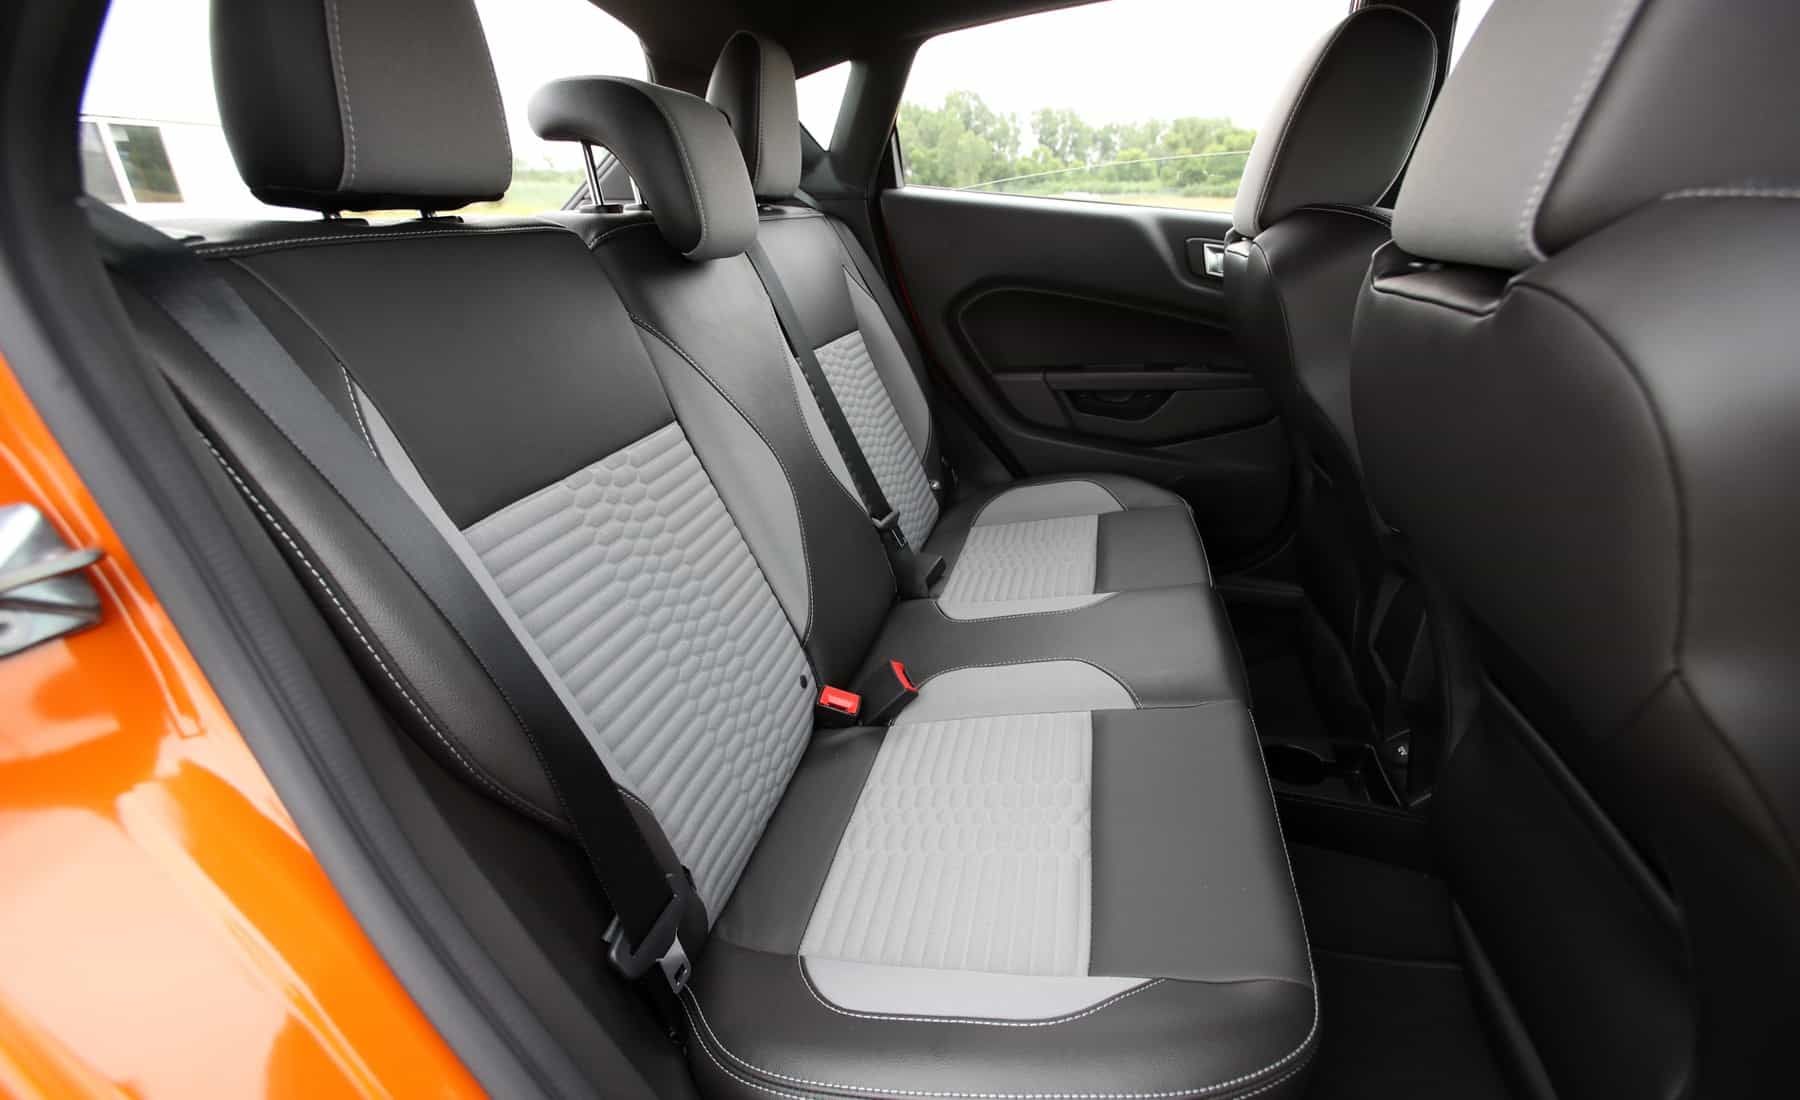 2017 Ford Fiesta ST Interior Seats Rear View (View 24 of 47)